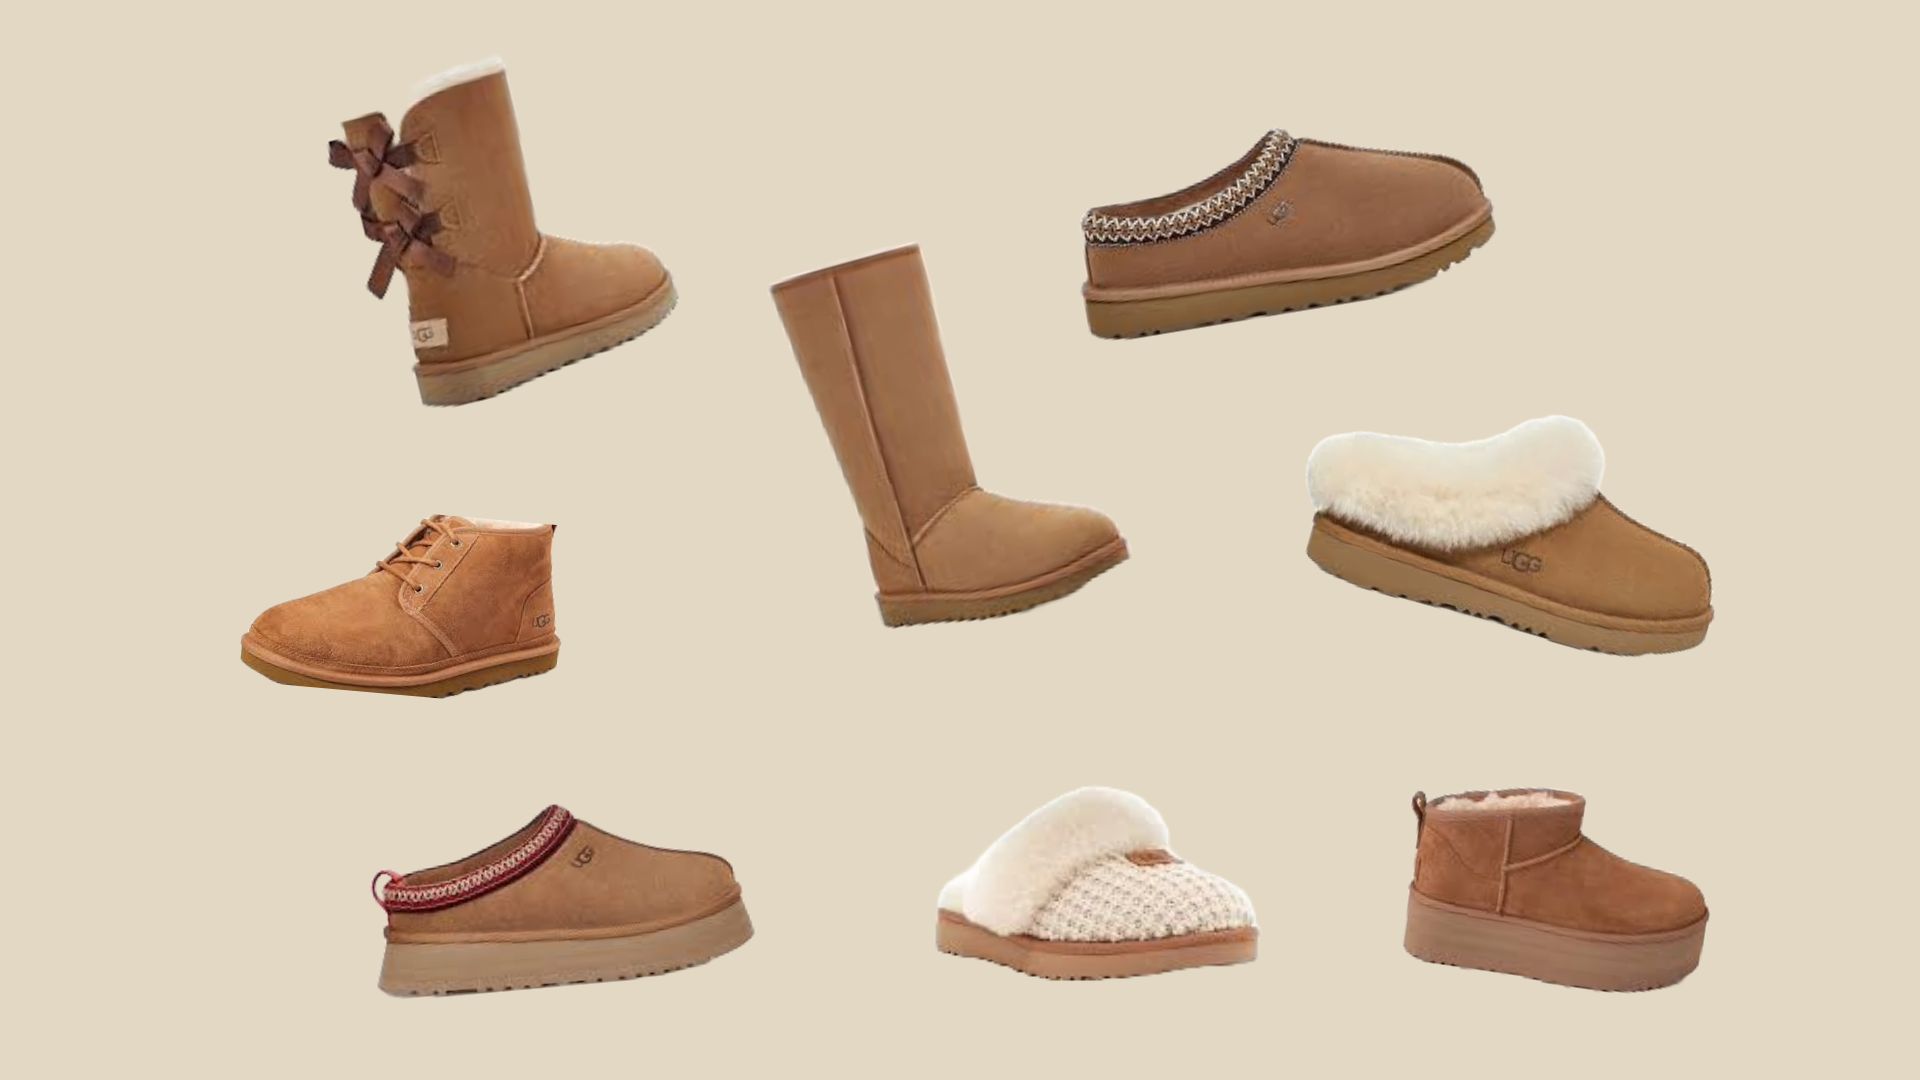 Uggs Worth the Hype or Overrated